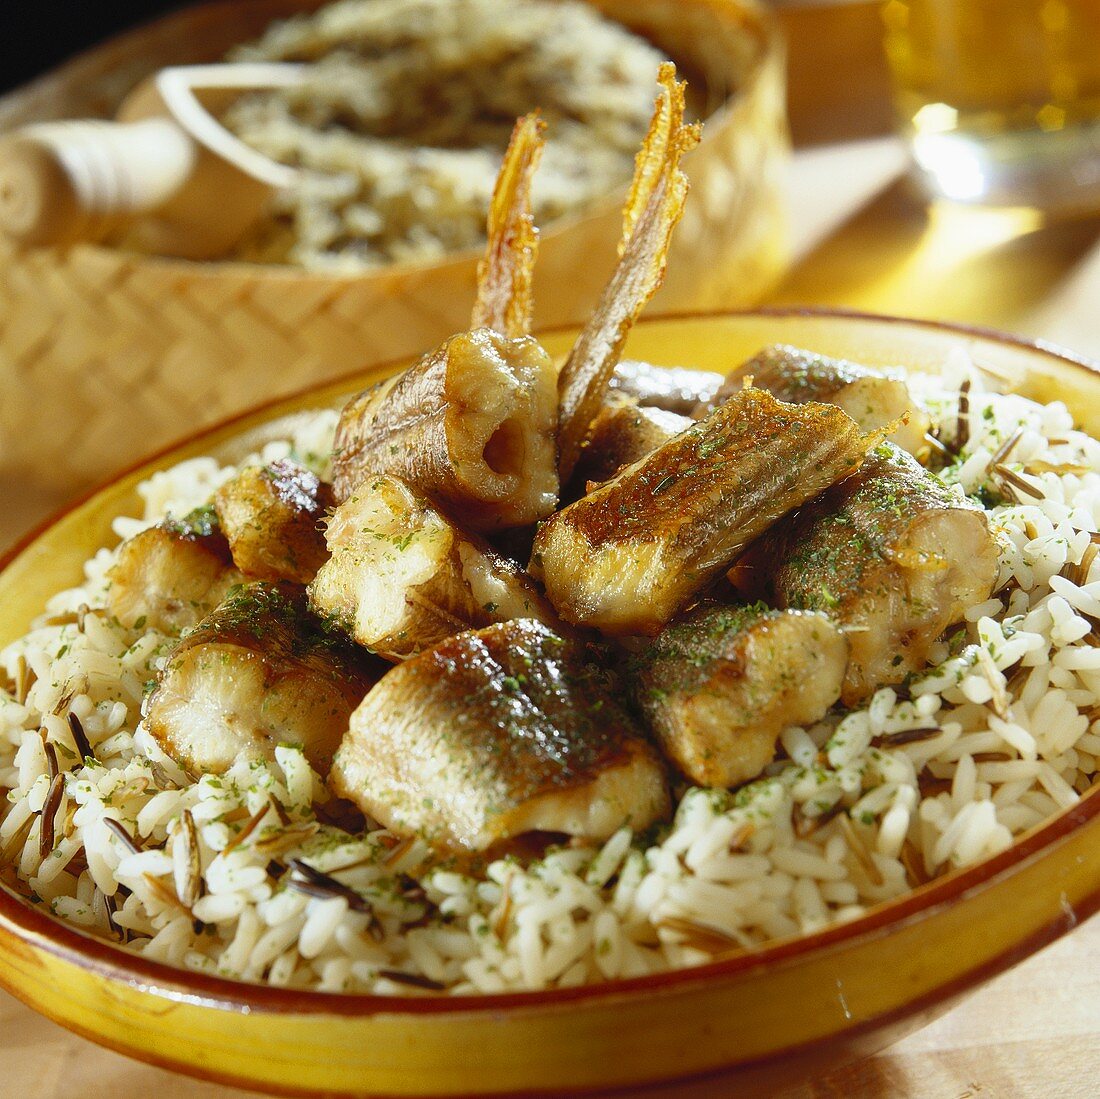 Fried eel on a bed of rice